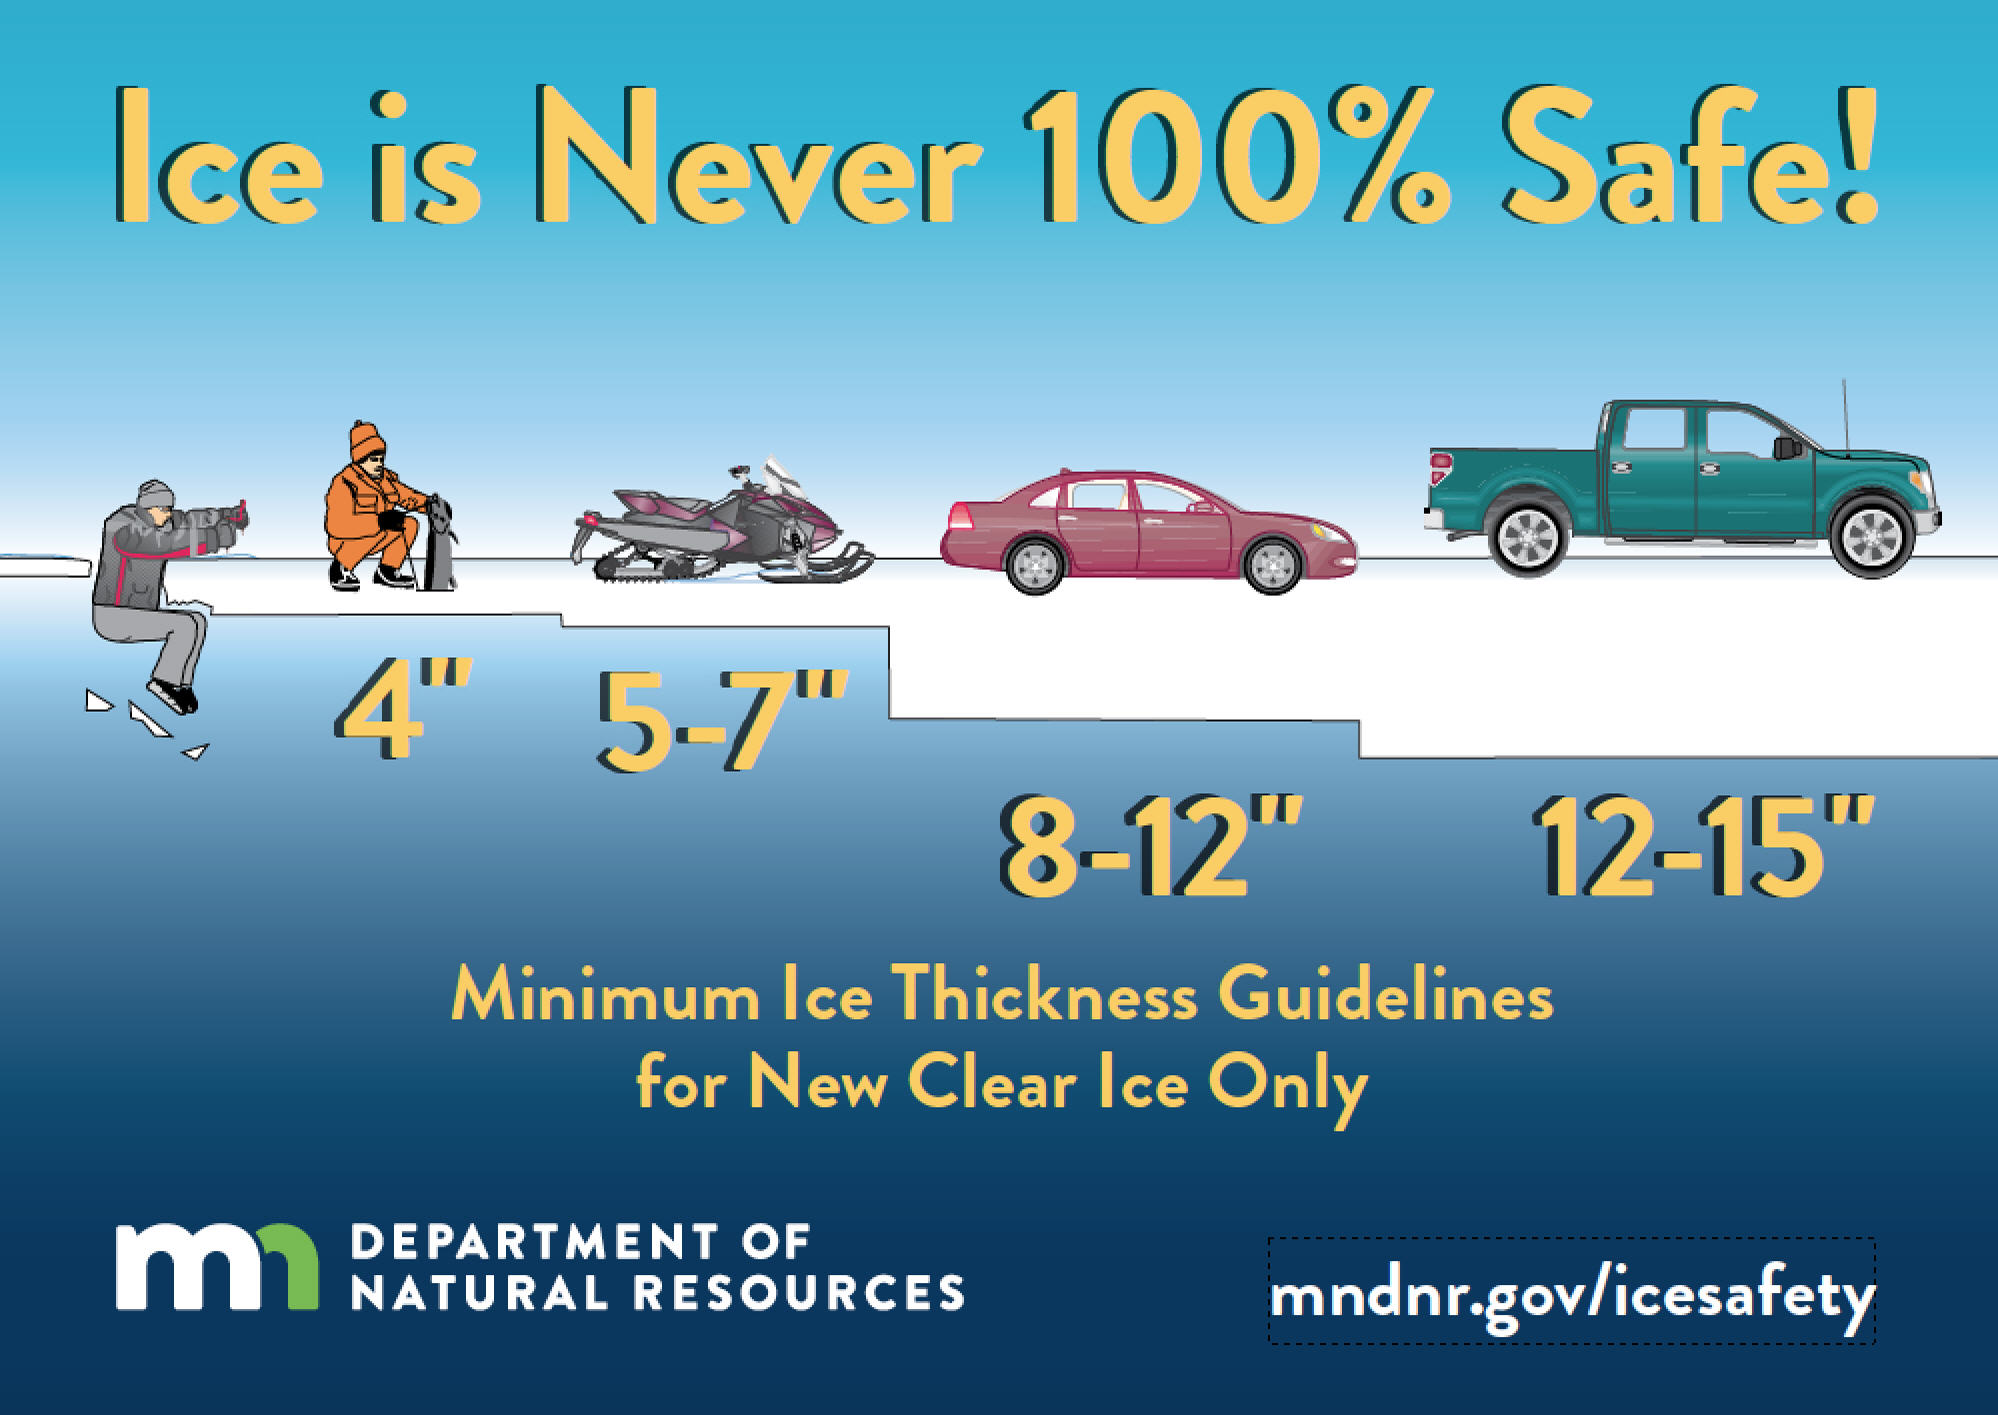 Ice thickness guidelines for new clear ice only from Minnesota Department of Natural Resources